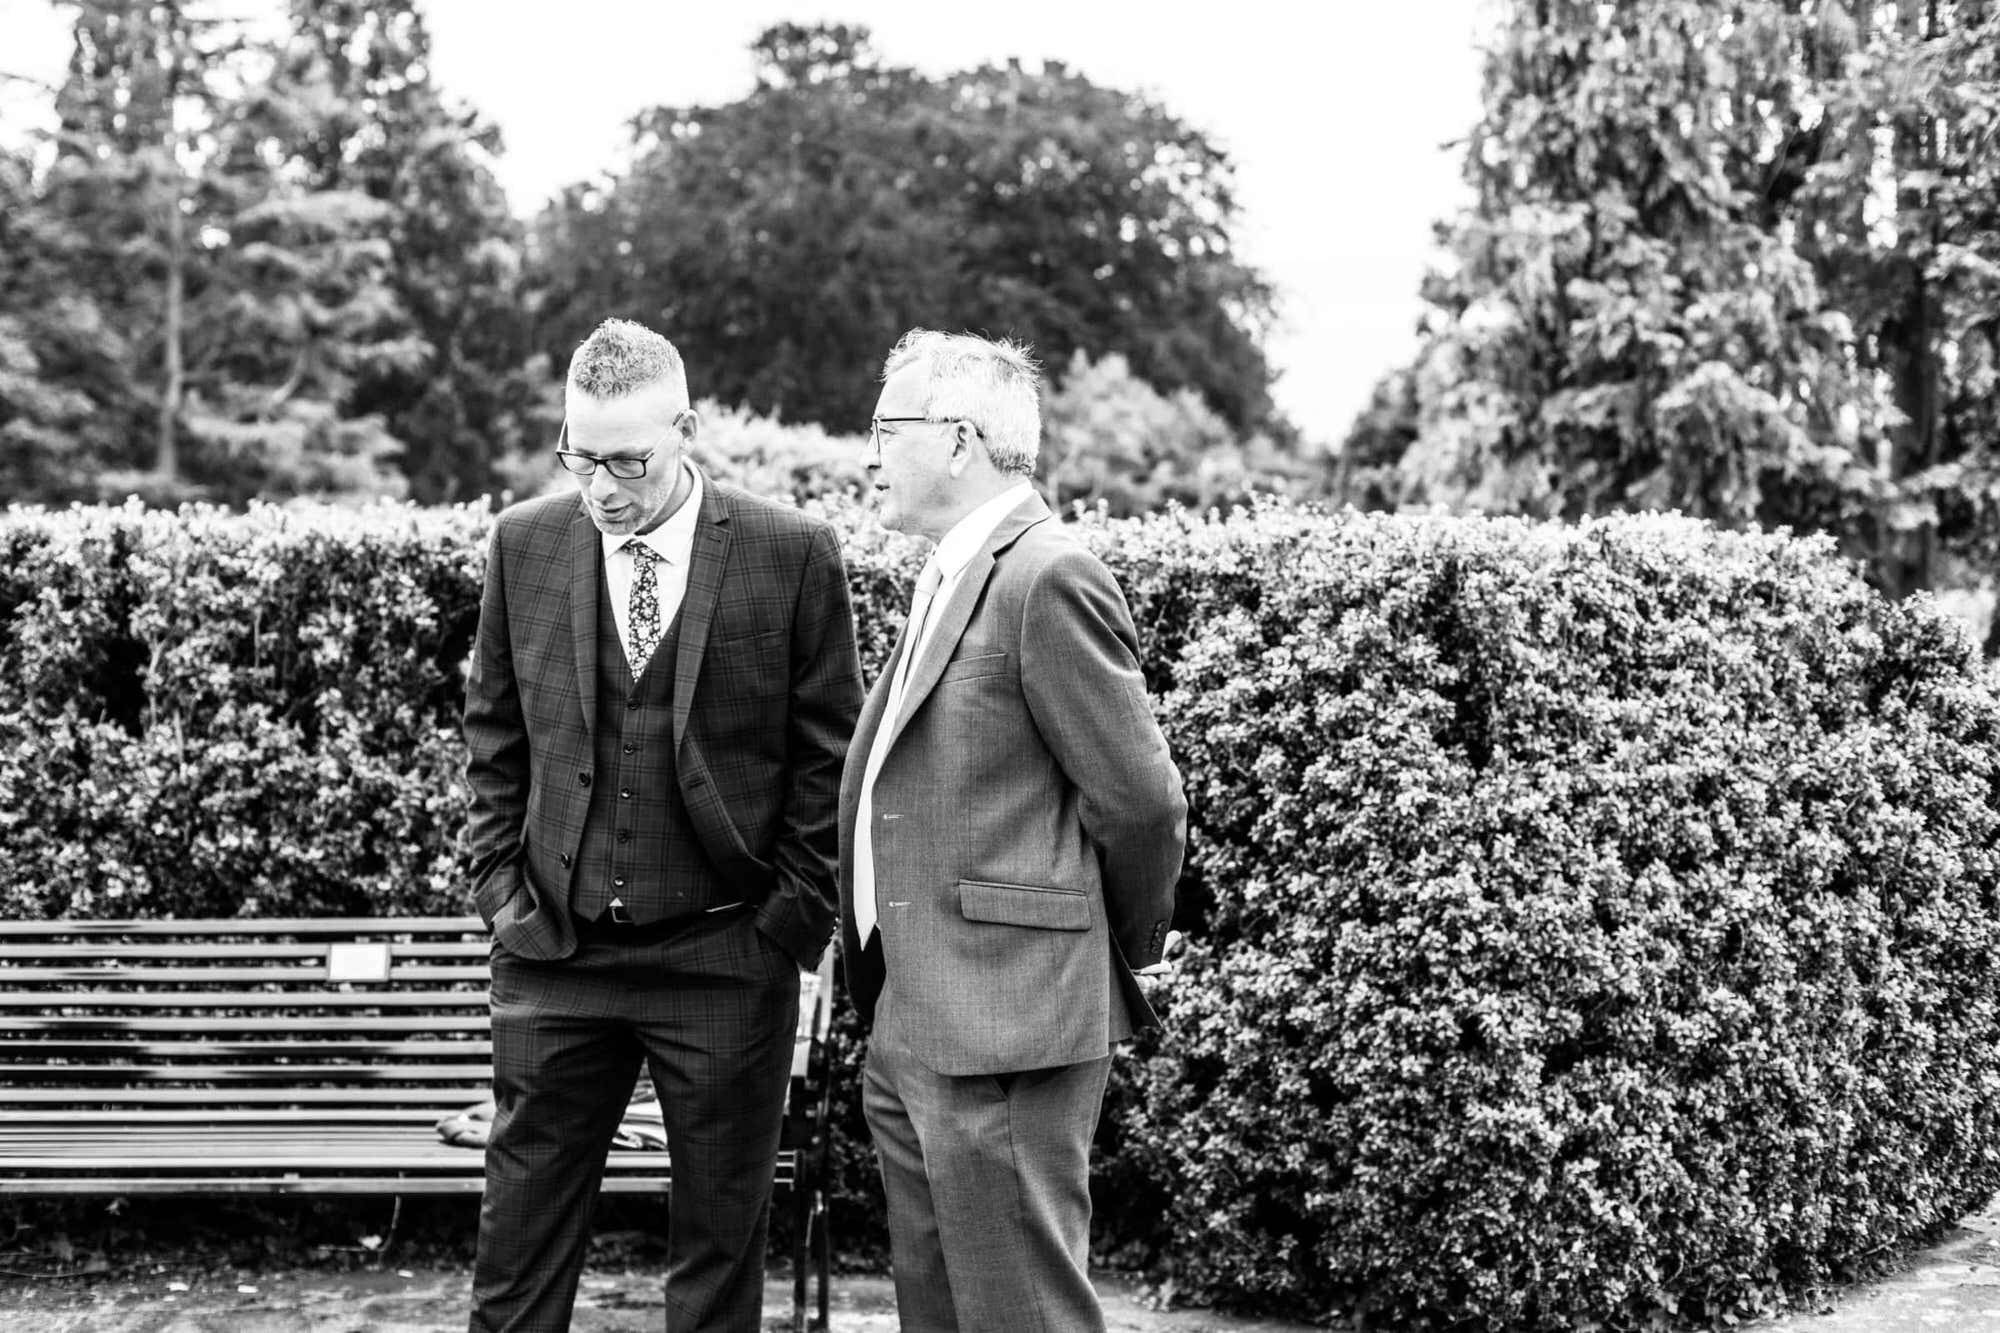 image of two men chatting take at a Kent micro wedding at Danson House Bexleyheath